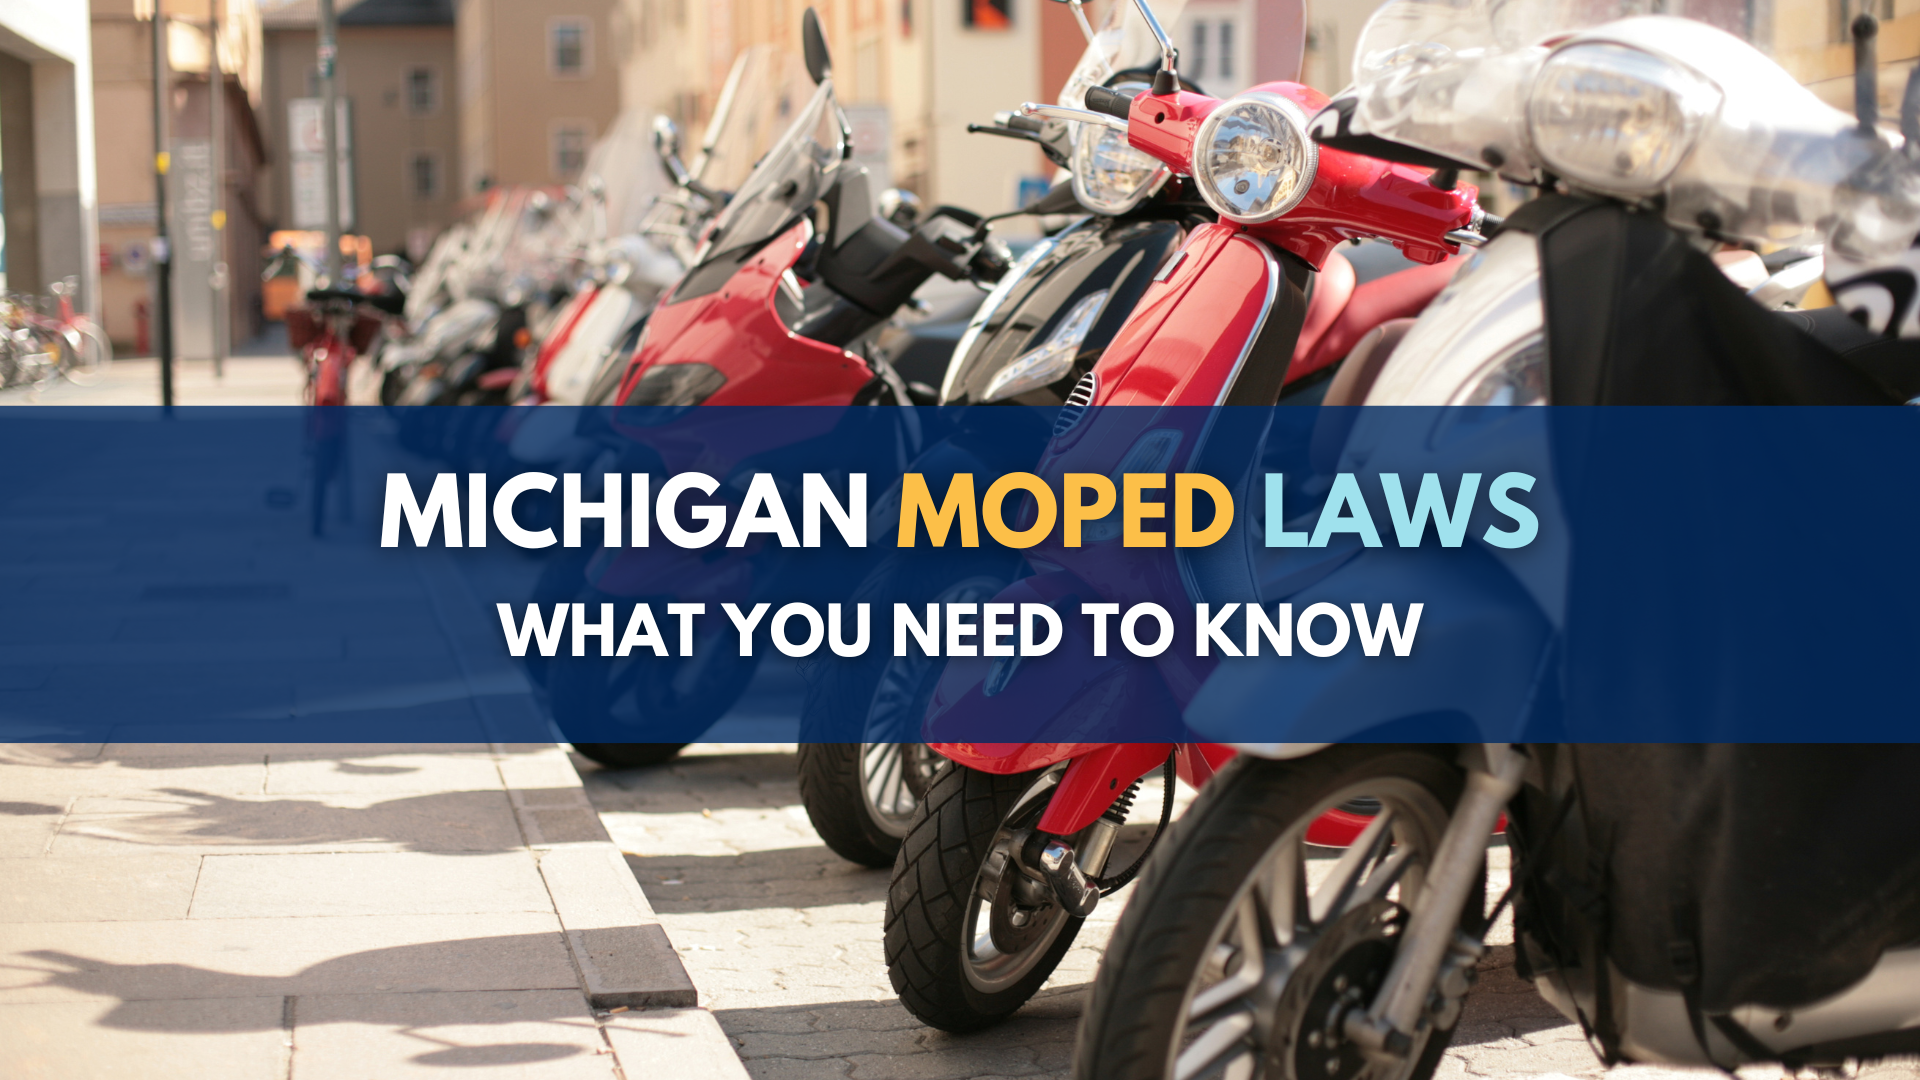 Michigan Moped Laws: What you need to know